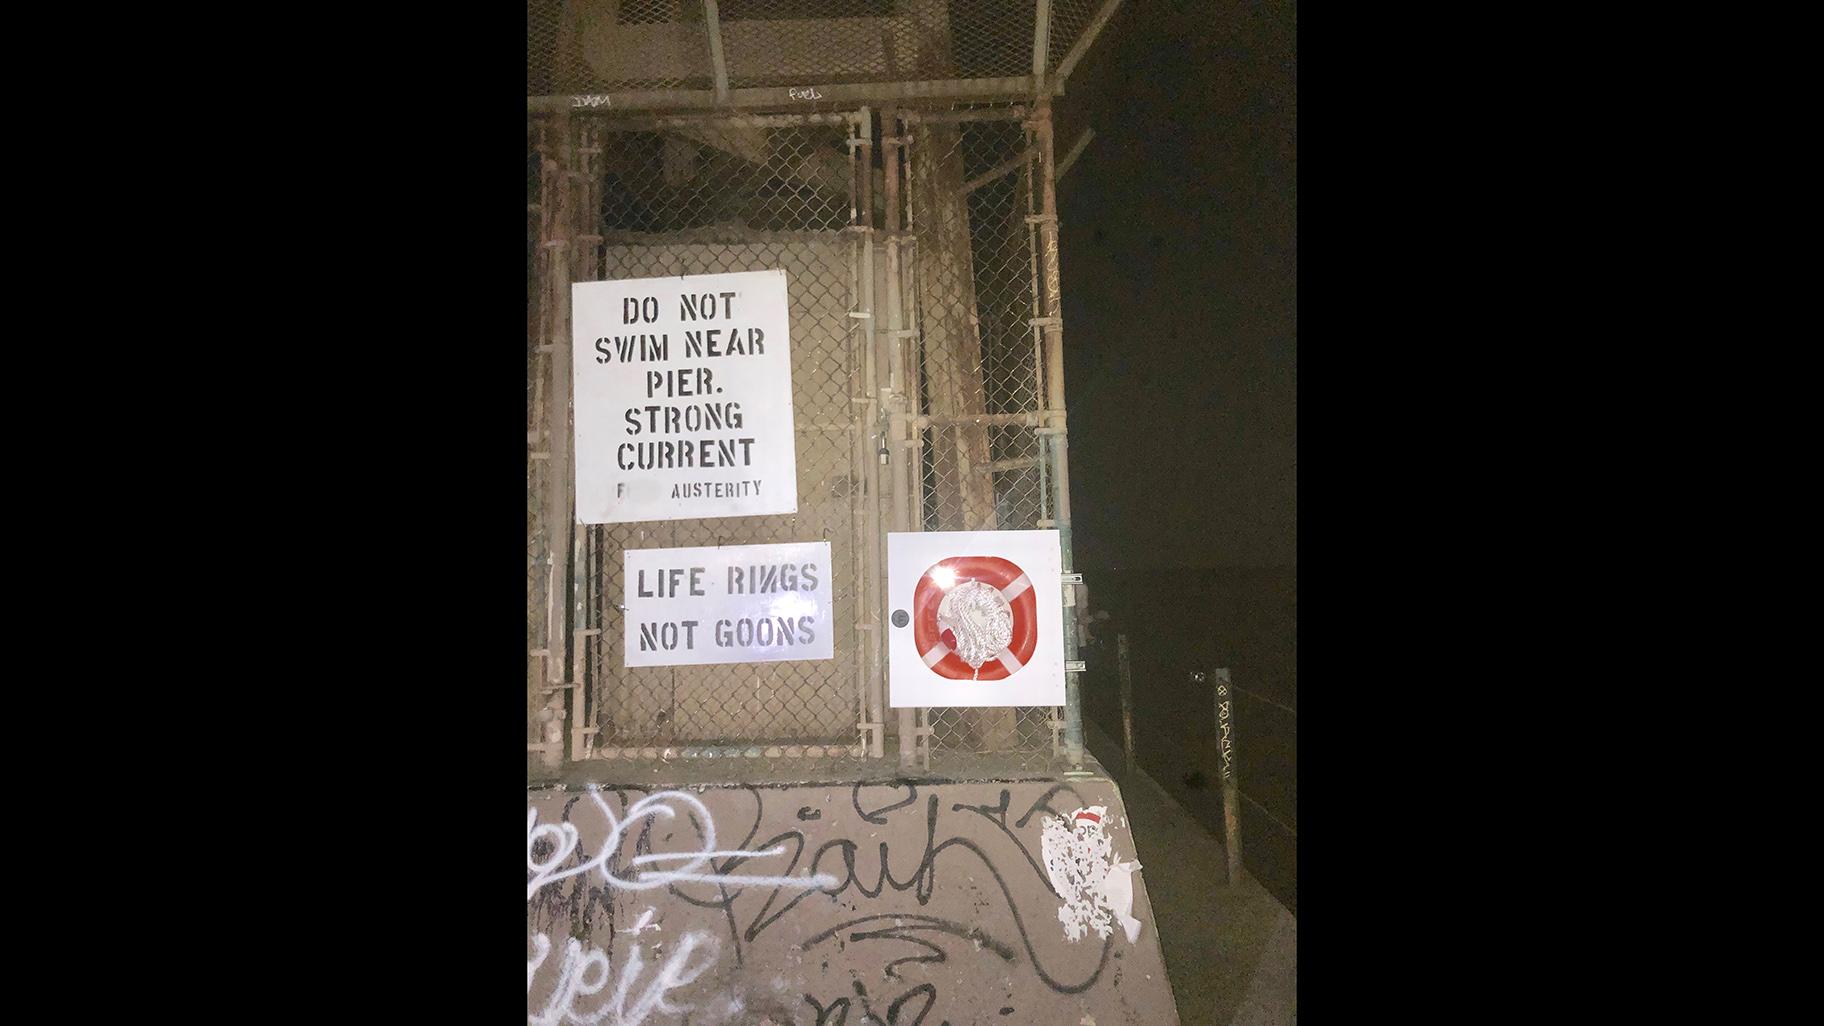 A photo edited by WTTW News to blur out a curse word shows a life ring installed on the lakefront by Rogers Park activist Jim Ginderske. Other residents put up anti-Park District signage, which was also removed. (Credit Jim Ginderske)